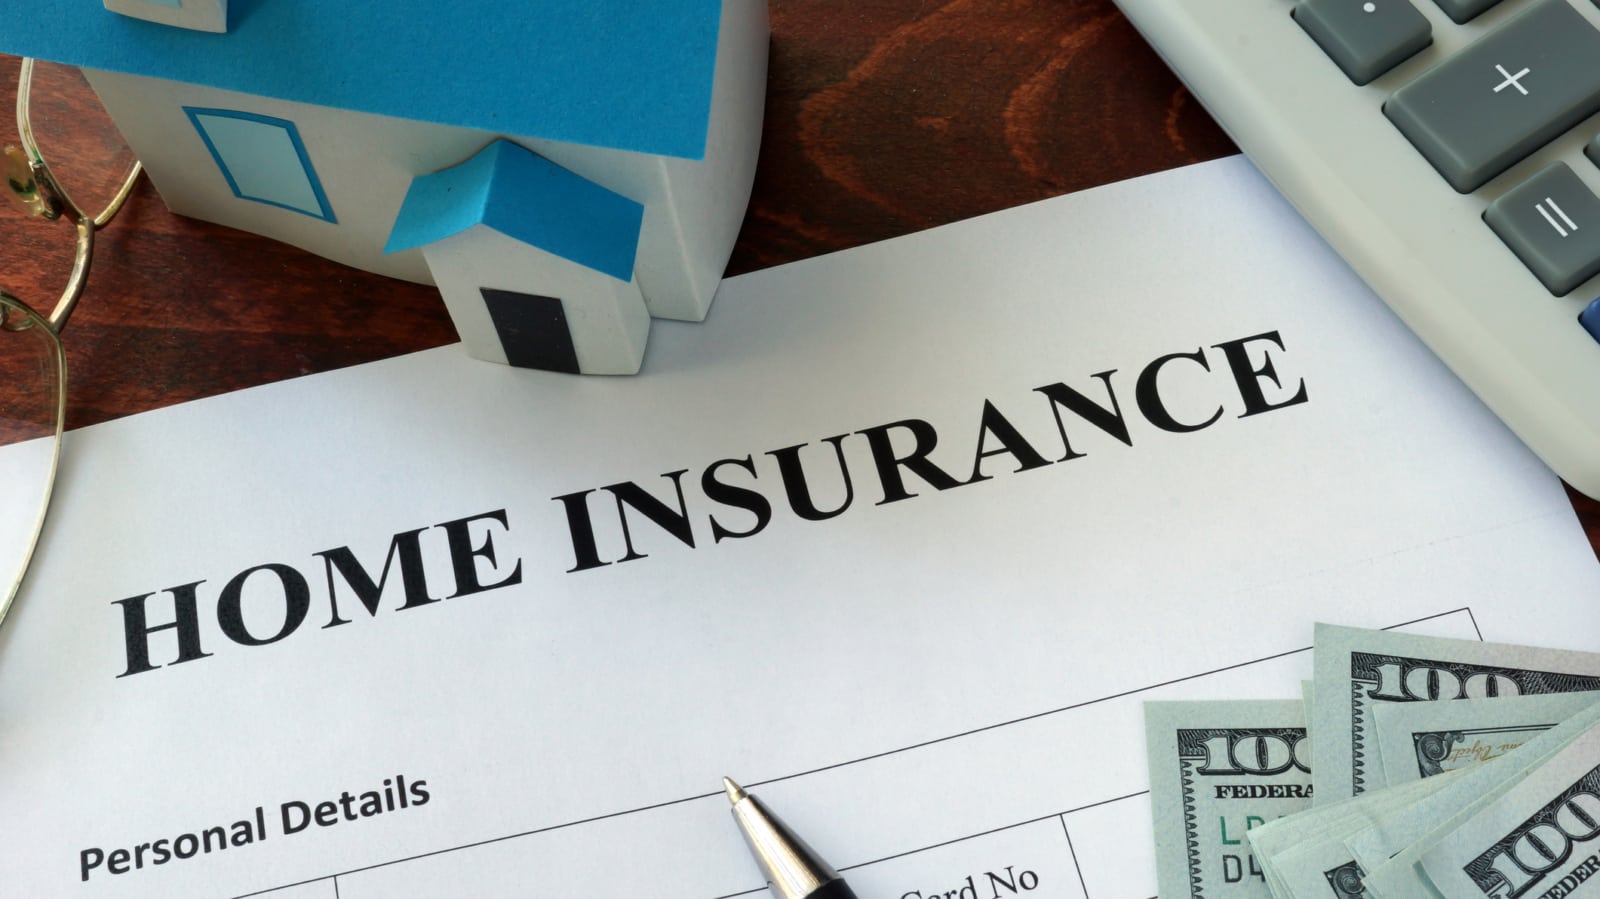 Home Insurance Form Stock Photo